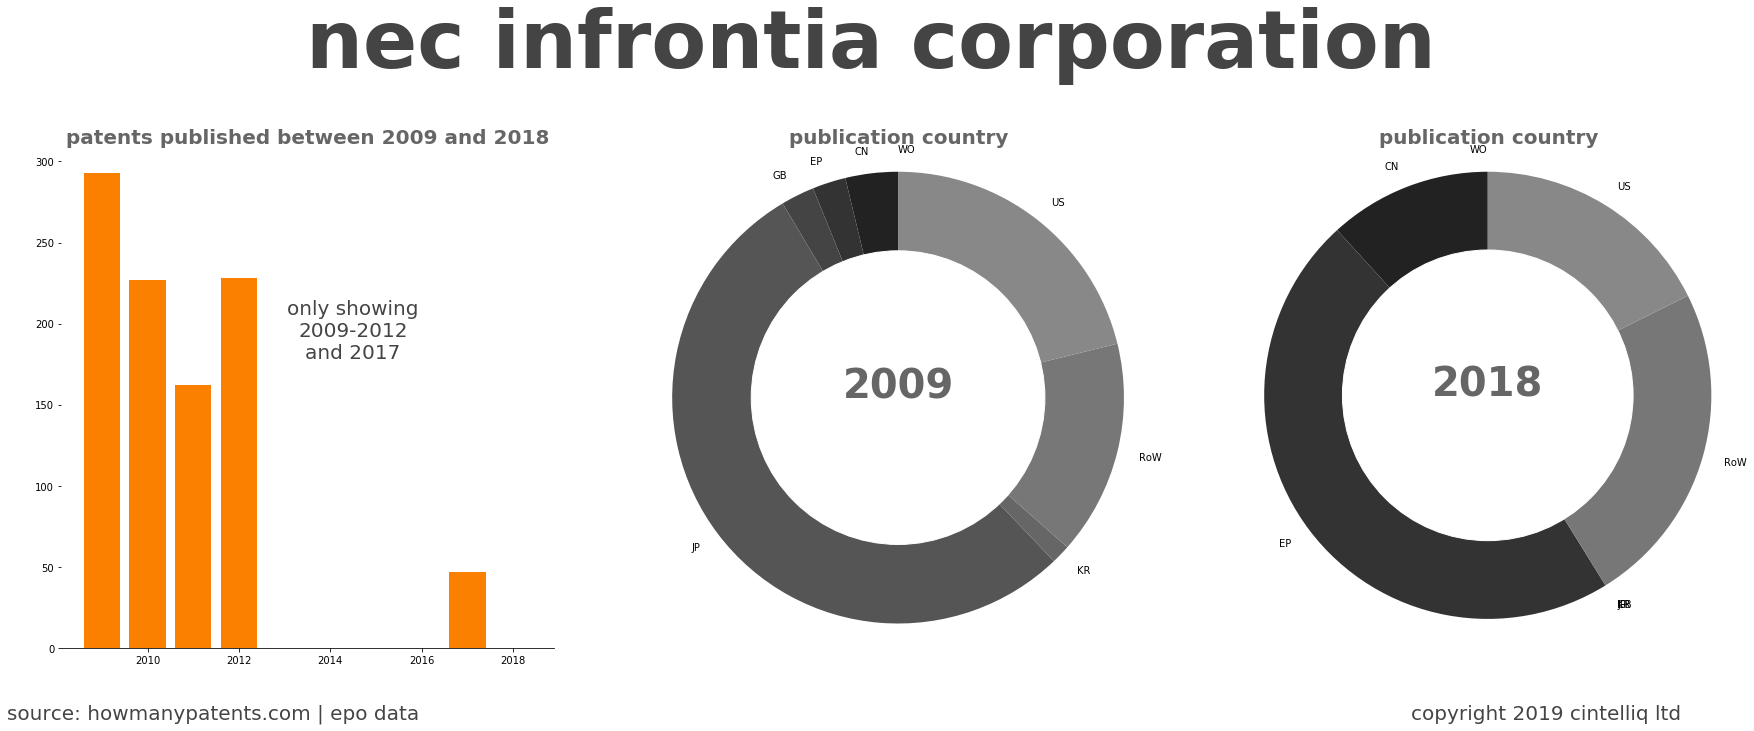 summary of patents for Nec Infrontia Corporation